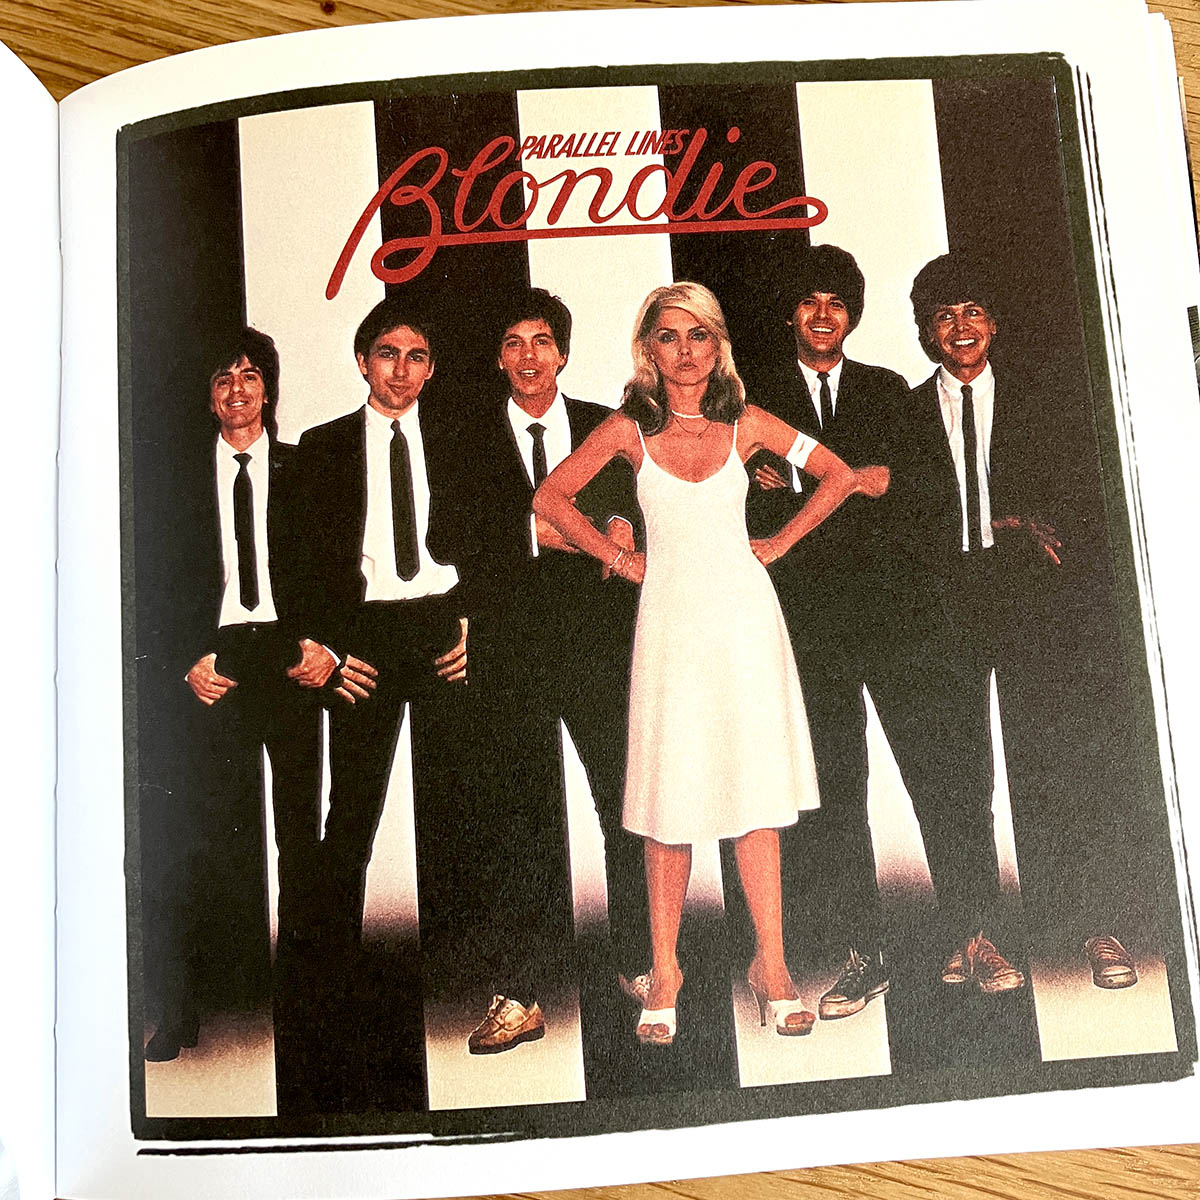 Blondie Parallel Lines album cover | photo By Kerwin